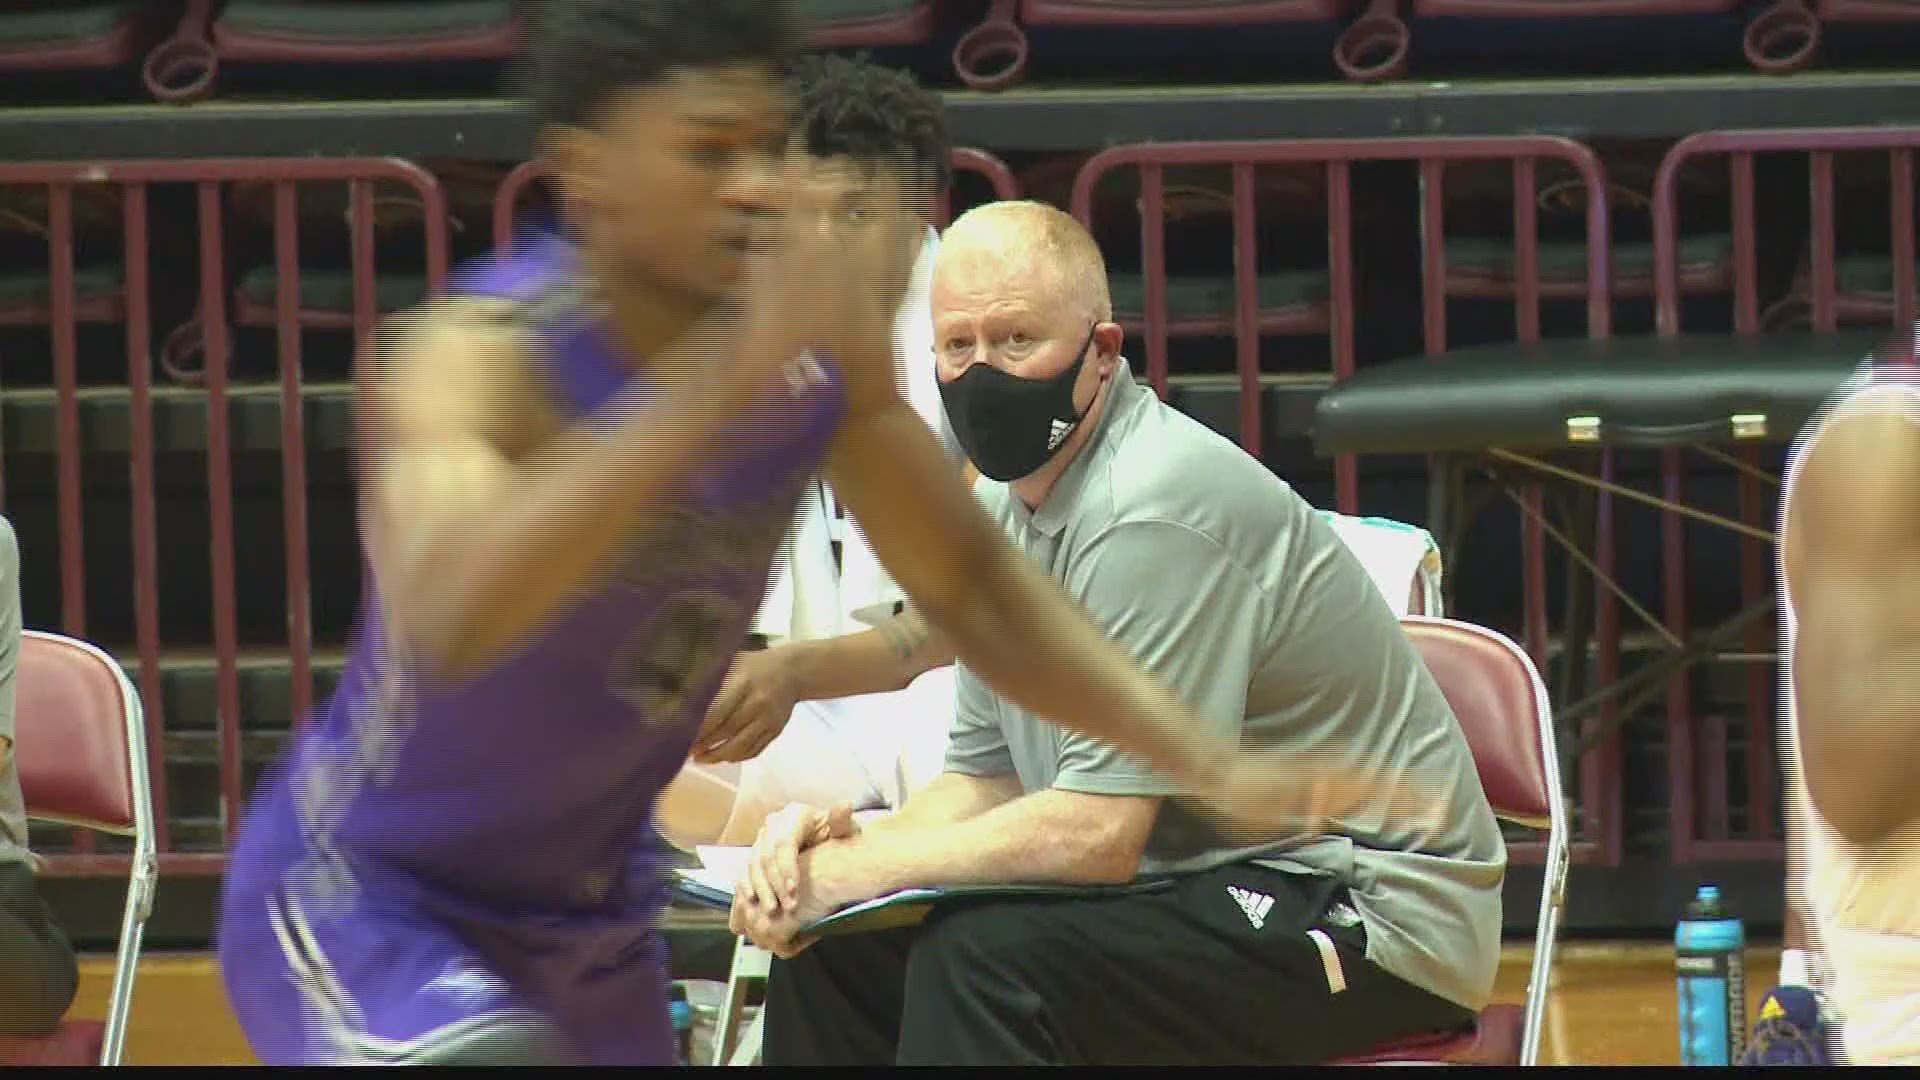 Winthrop is 5-0 for the first time in nearly 40 years. The Eagles defeated a very good Furman team 87-71.